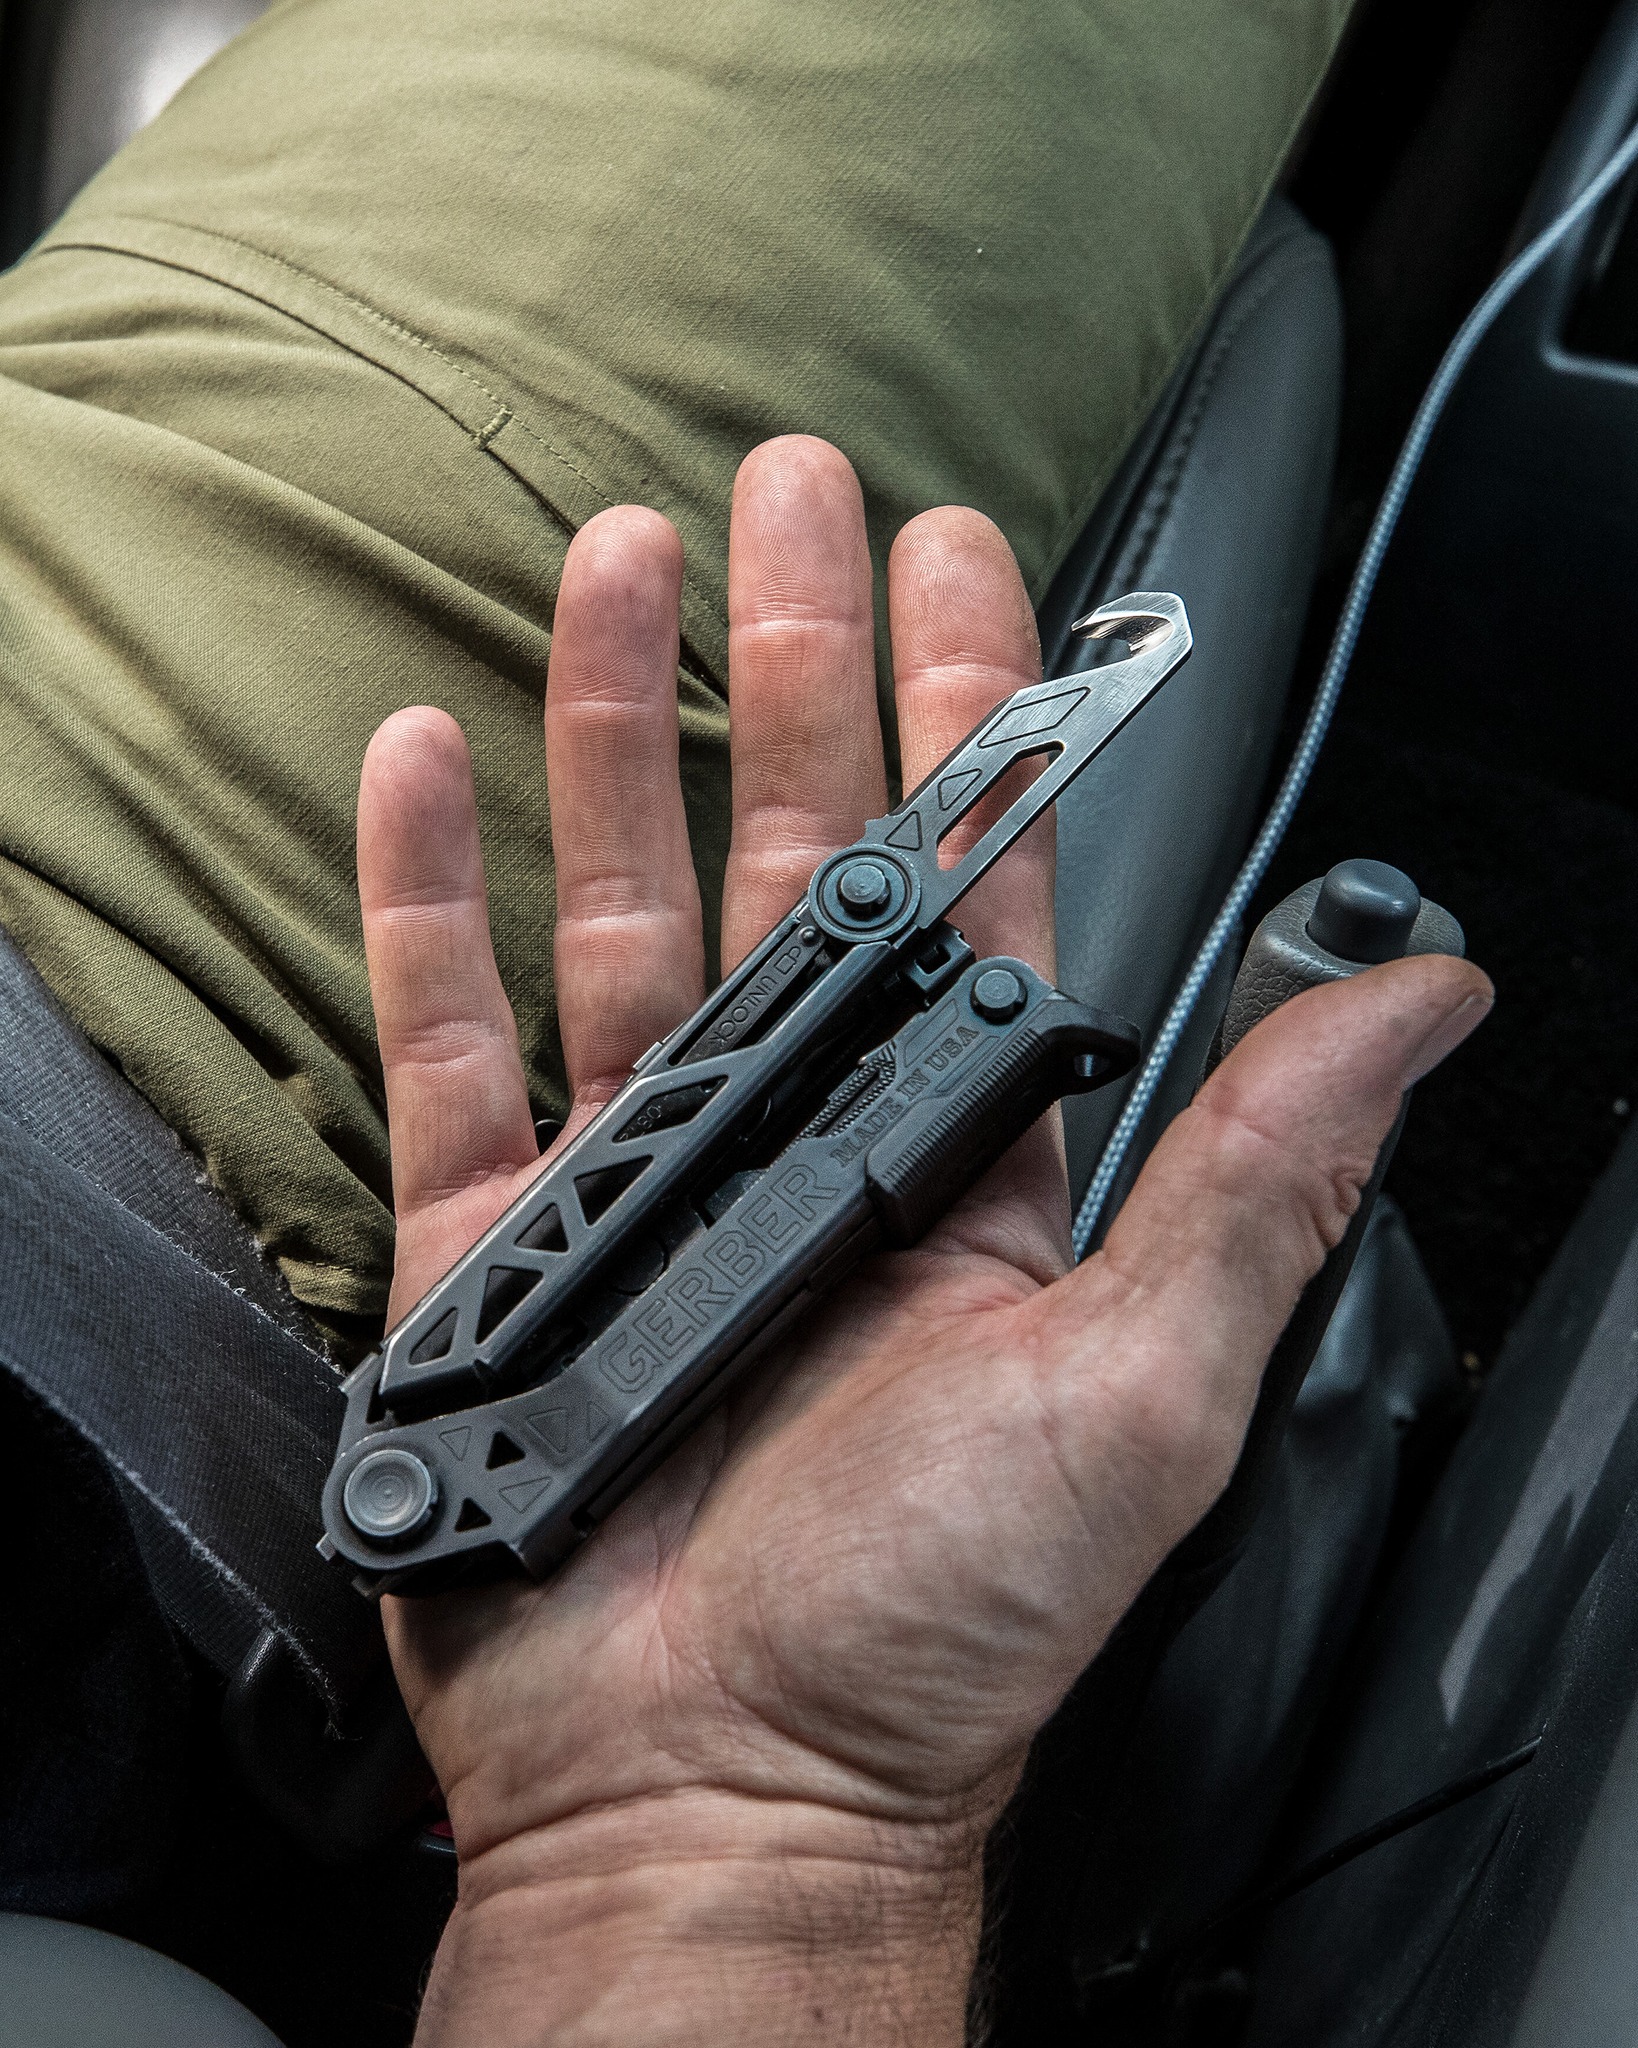 Center-Drive Rescue from Gerber